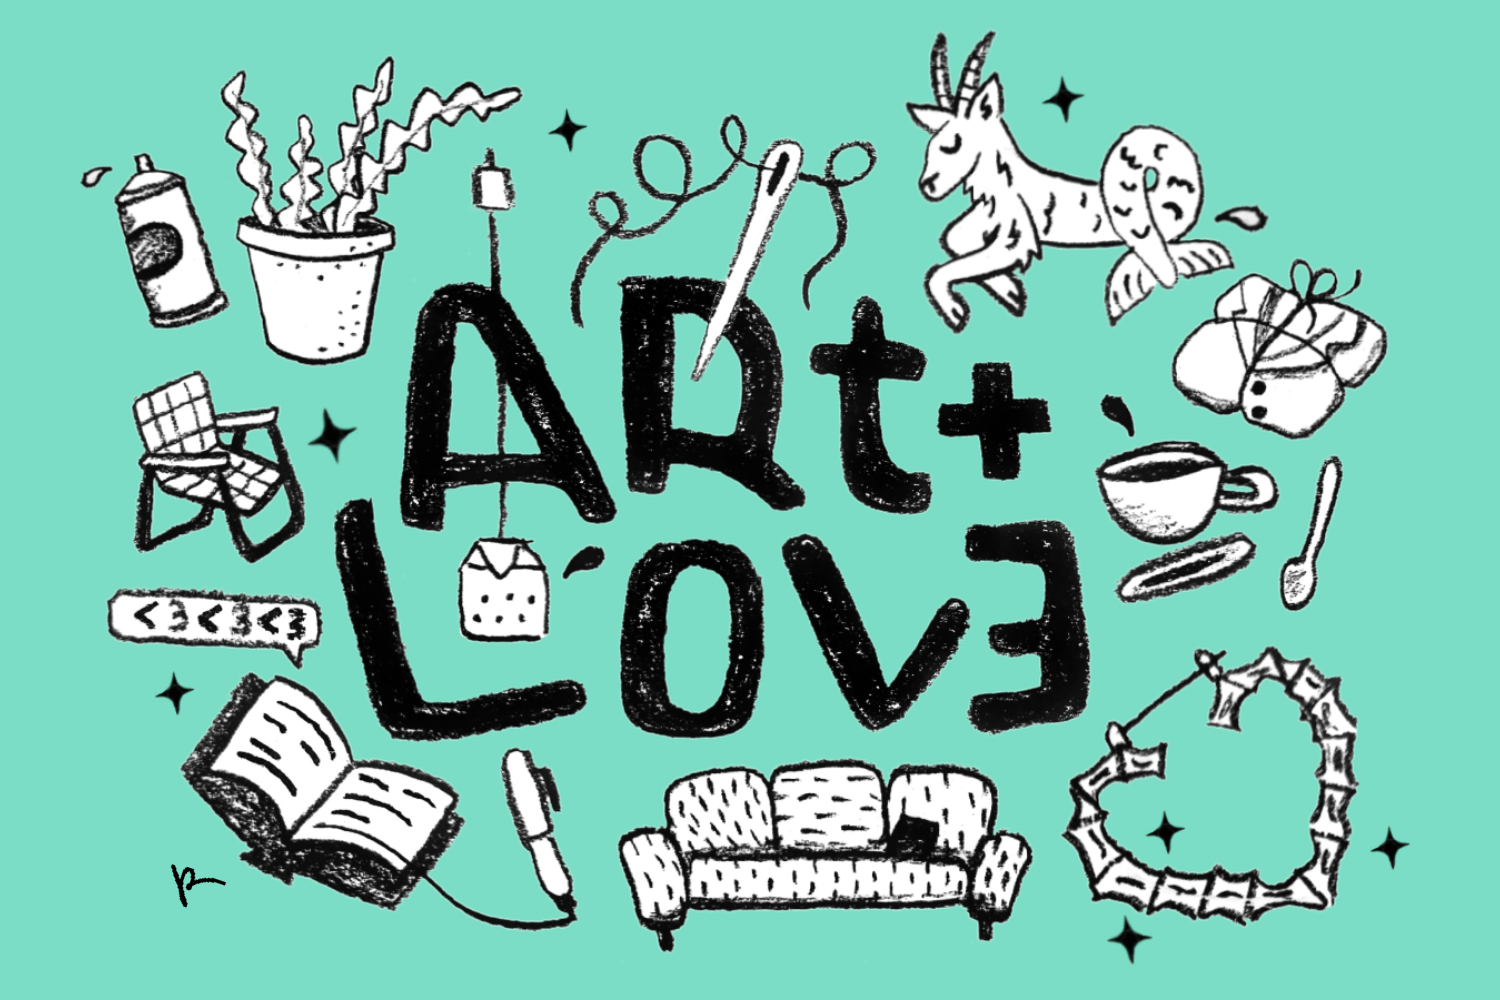 Image: A graphic that says "ART + LOVE" in black letters on a teal background. Surrounding the words are various illustrations of objects, such as a book, a couch, a hoop earring, a coffee mug, and more. Illustration by River Ian Kerstetter.